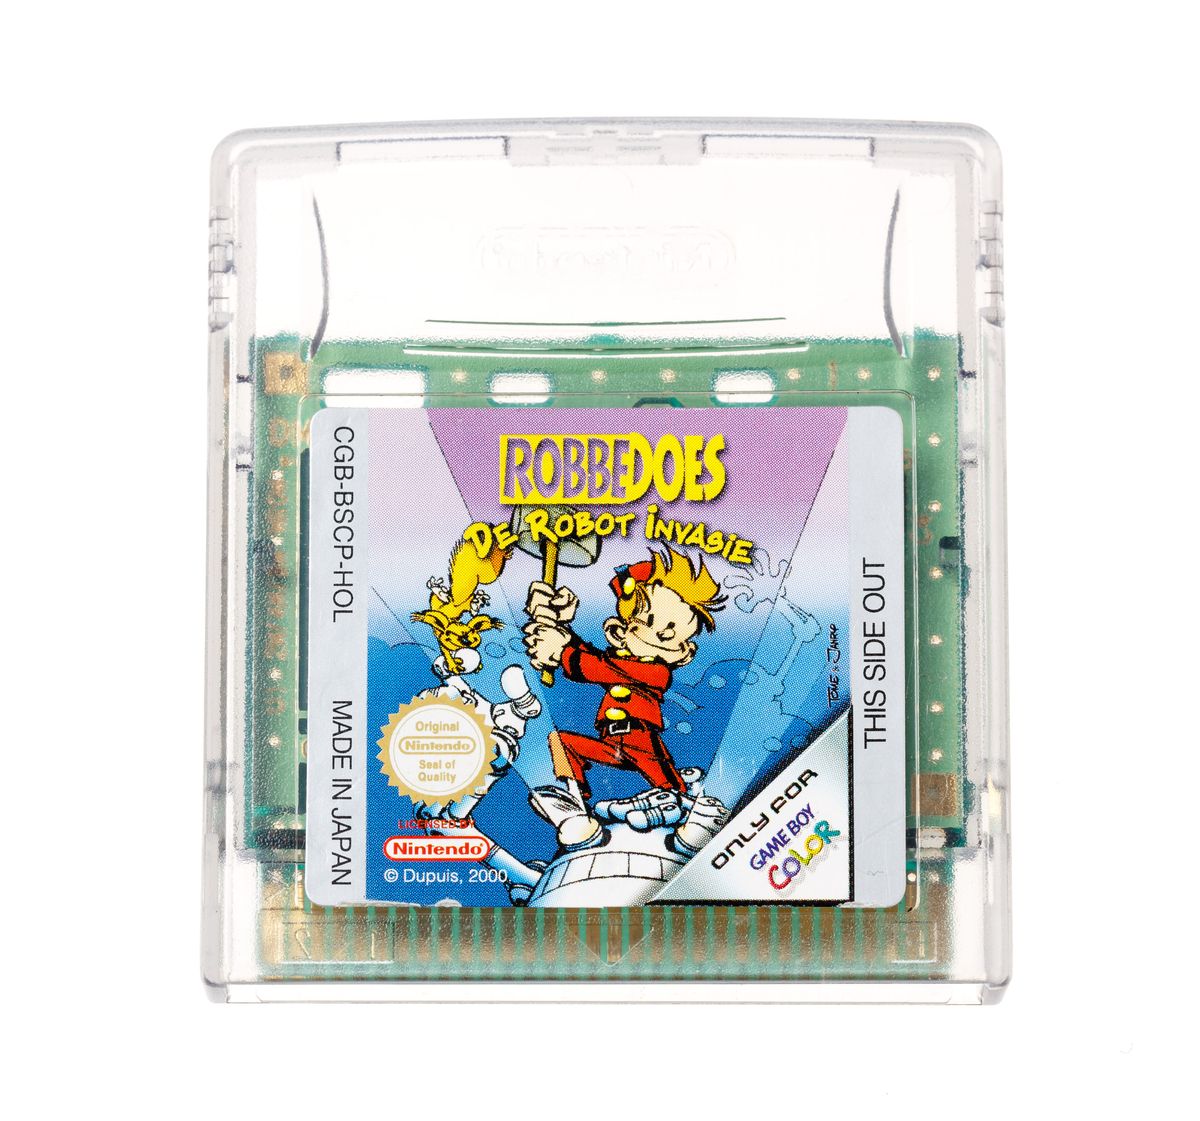 Robbedoes - Gameboy Color Games